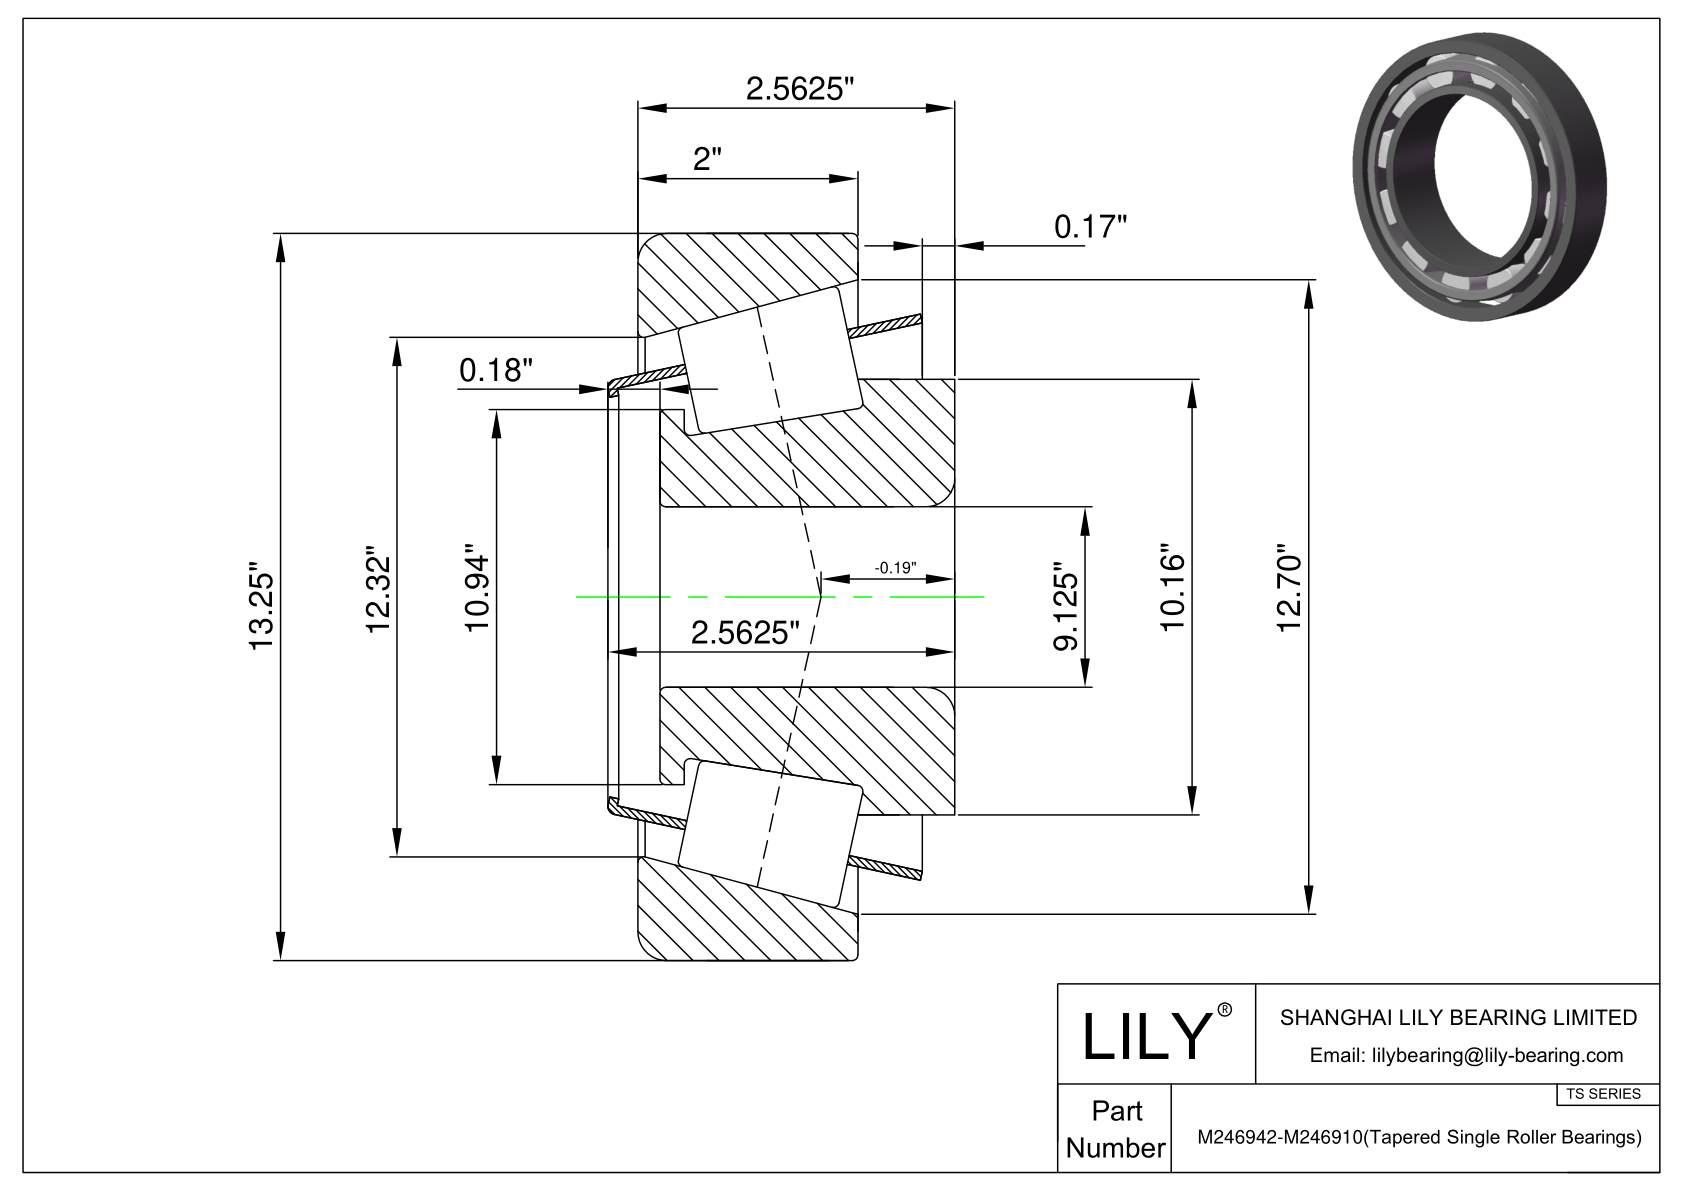 M246942-M246910 TS (Tapered Single Roller Bearings) (Imperial) cad drawing